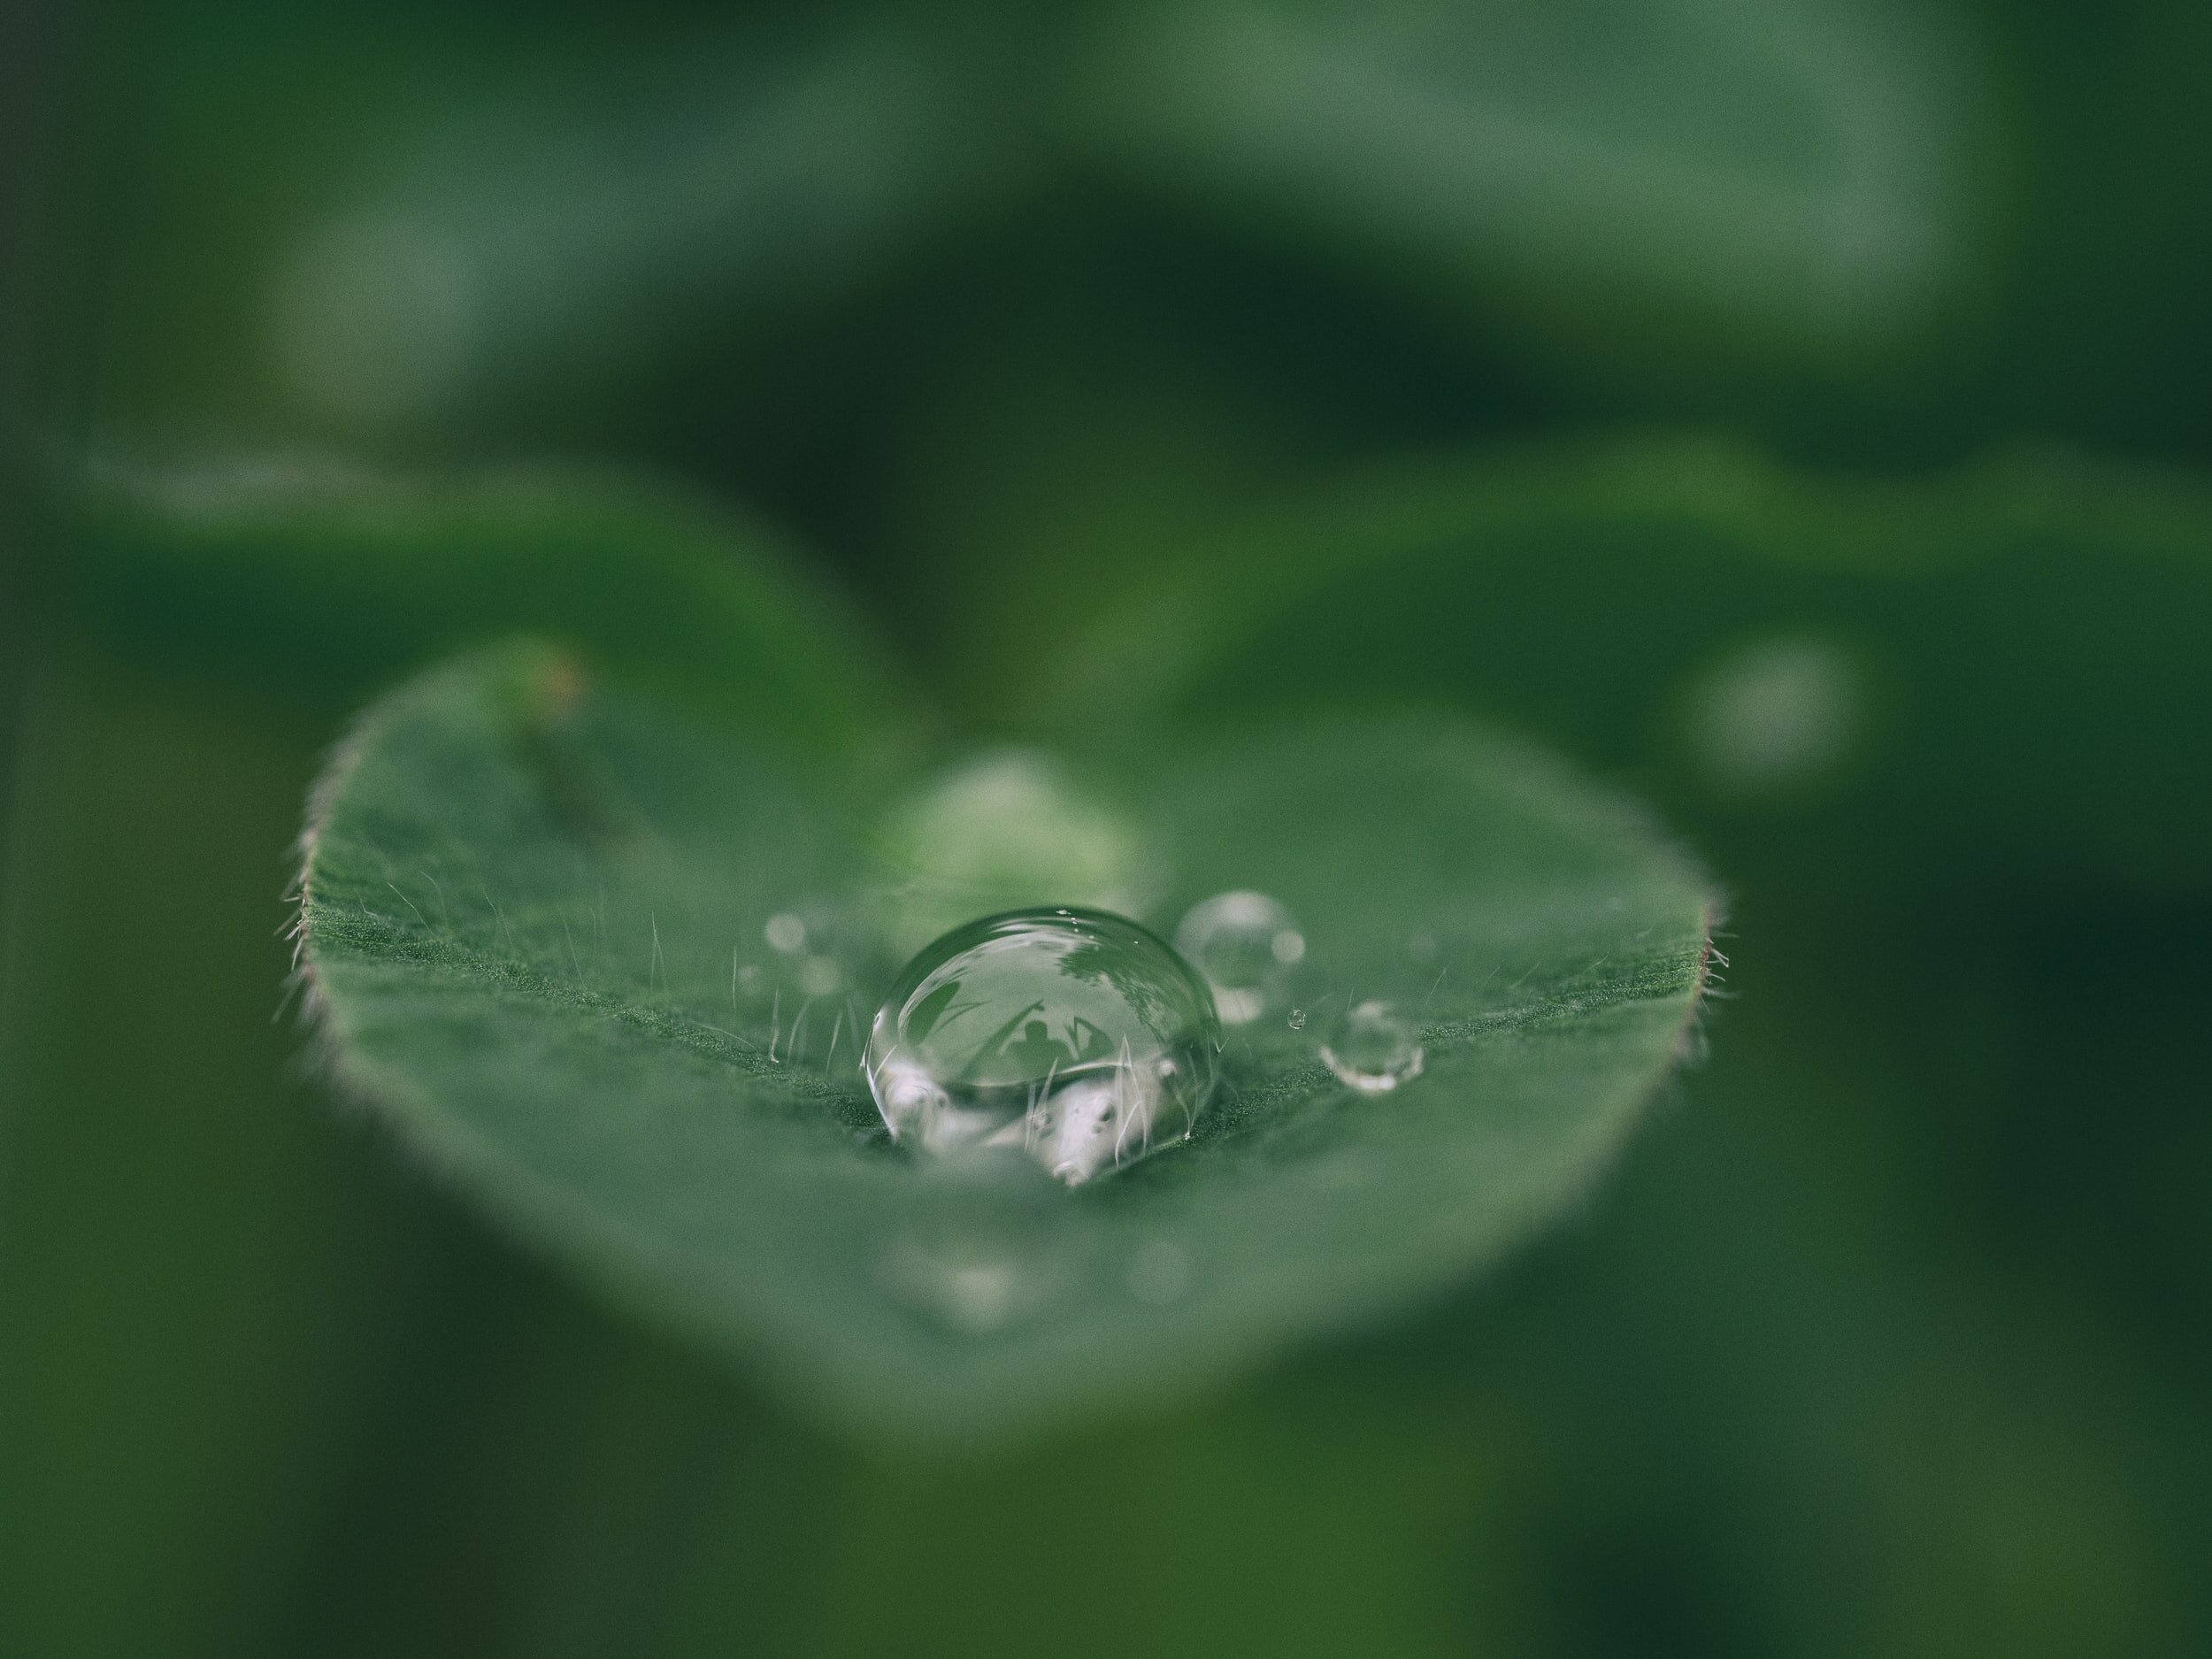 close up picture of a drop of water on a leaf